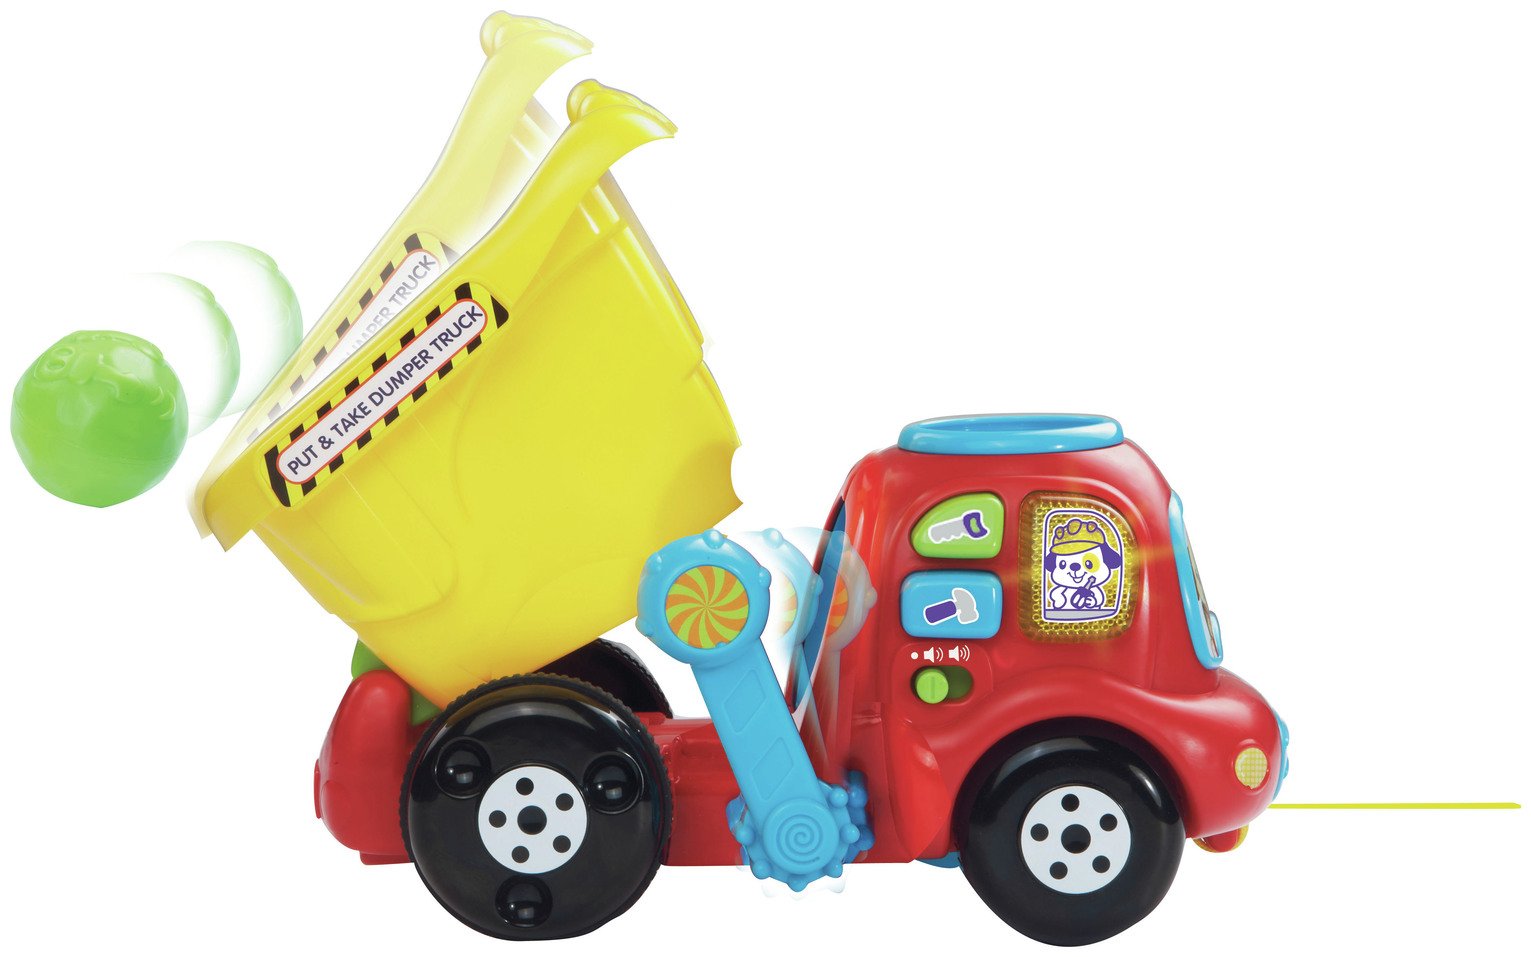 VTech Put And Take Dumper Truck Review